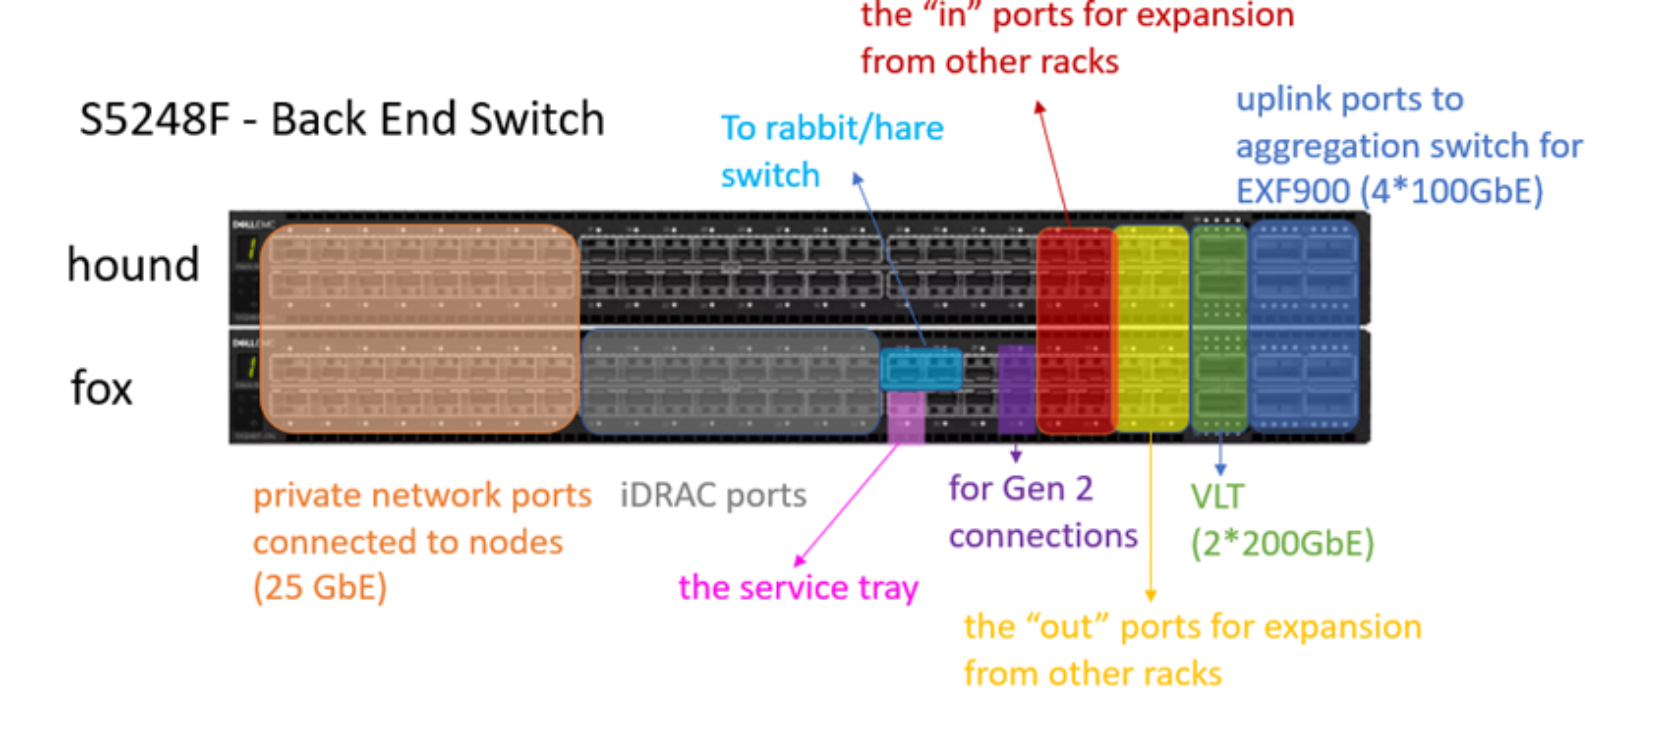 This is an S5248F back end switch, which includes 25GbE private network ports connected to nodes, iDRAC ports and VLT ports.